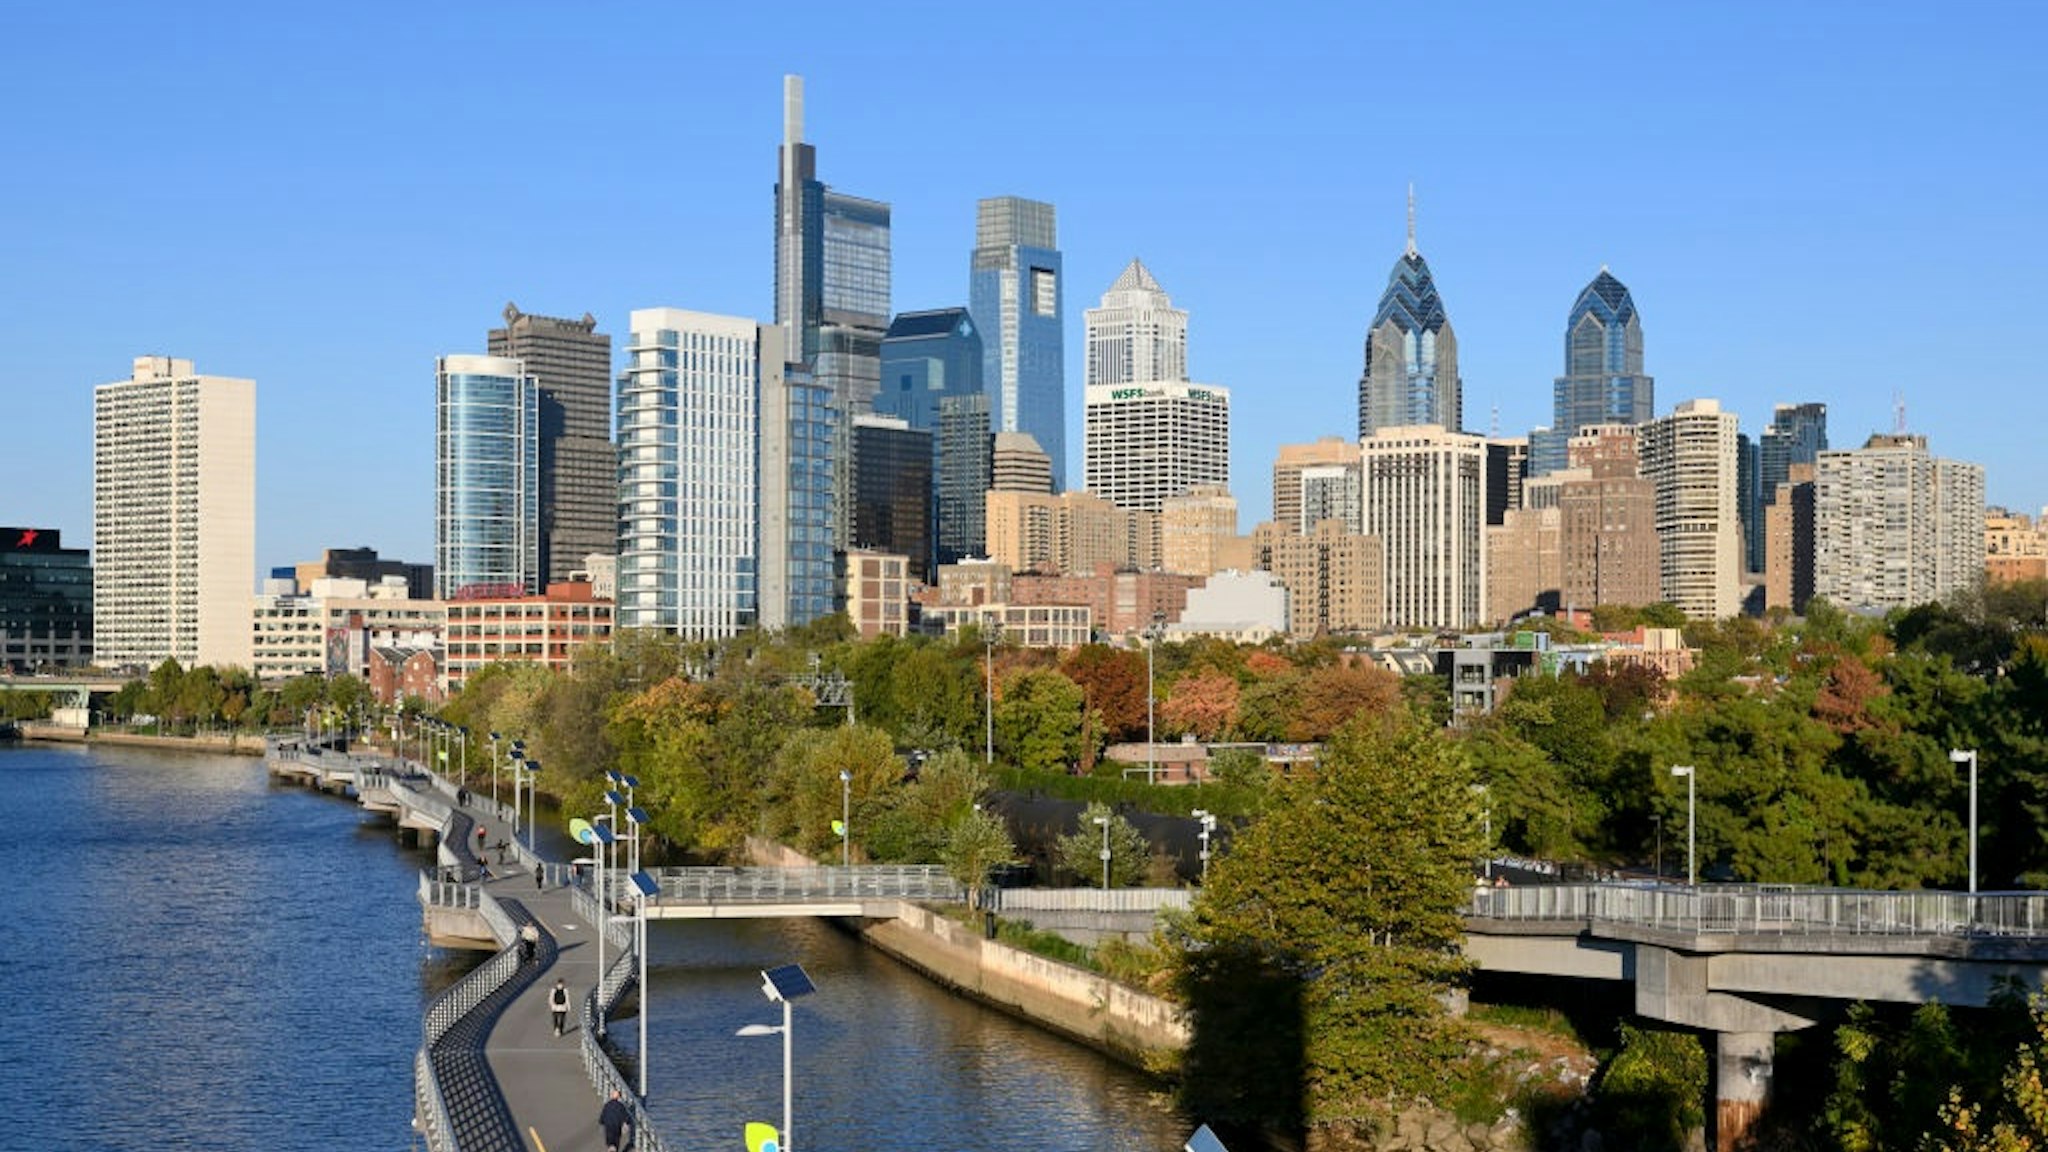 View on the Center City skyline as seen from the South Street Bridge, in Philadelphia, PA, on October 23, 2019.